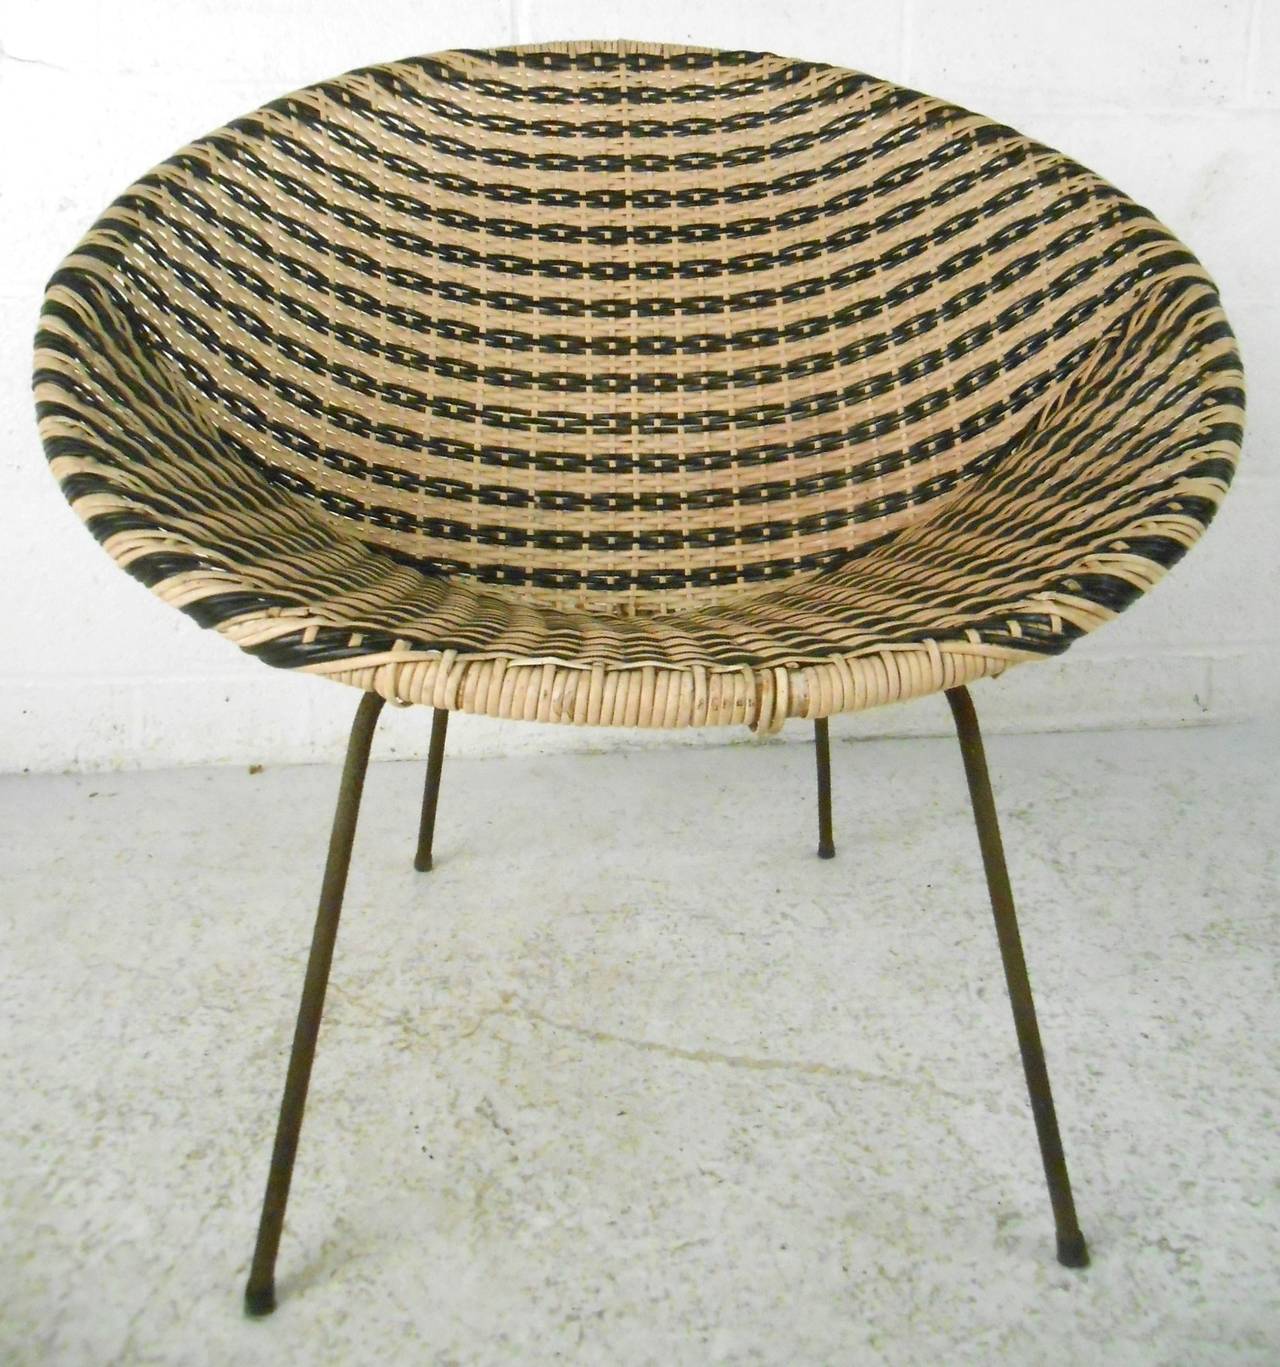 This unique vintage design combines simplicity and style, and is well suited to either interior or porch use. Woven vinyl & wicker combine in comfortable womb like design, framed on cast iron legs. Please confirm item location (NY or NJ).